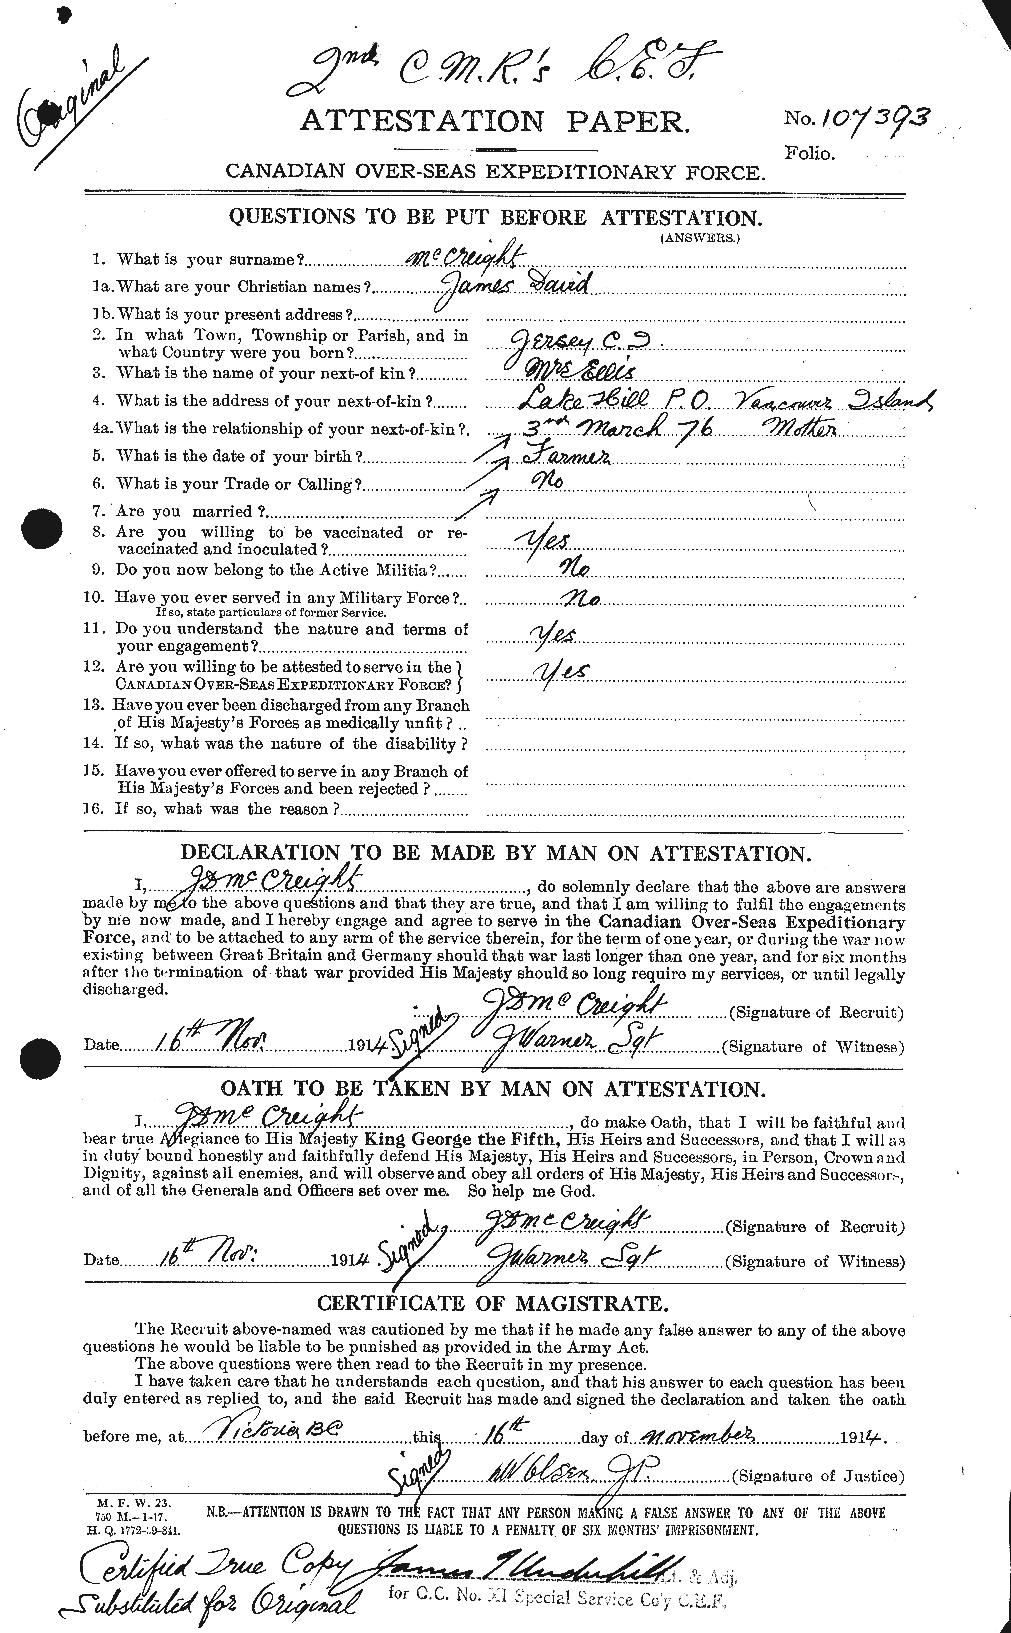 Personnel Records of the First World War - CEF 135955a